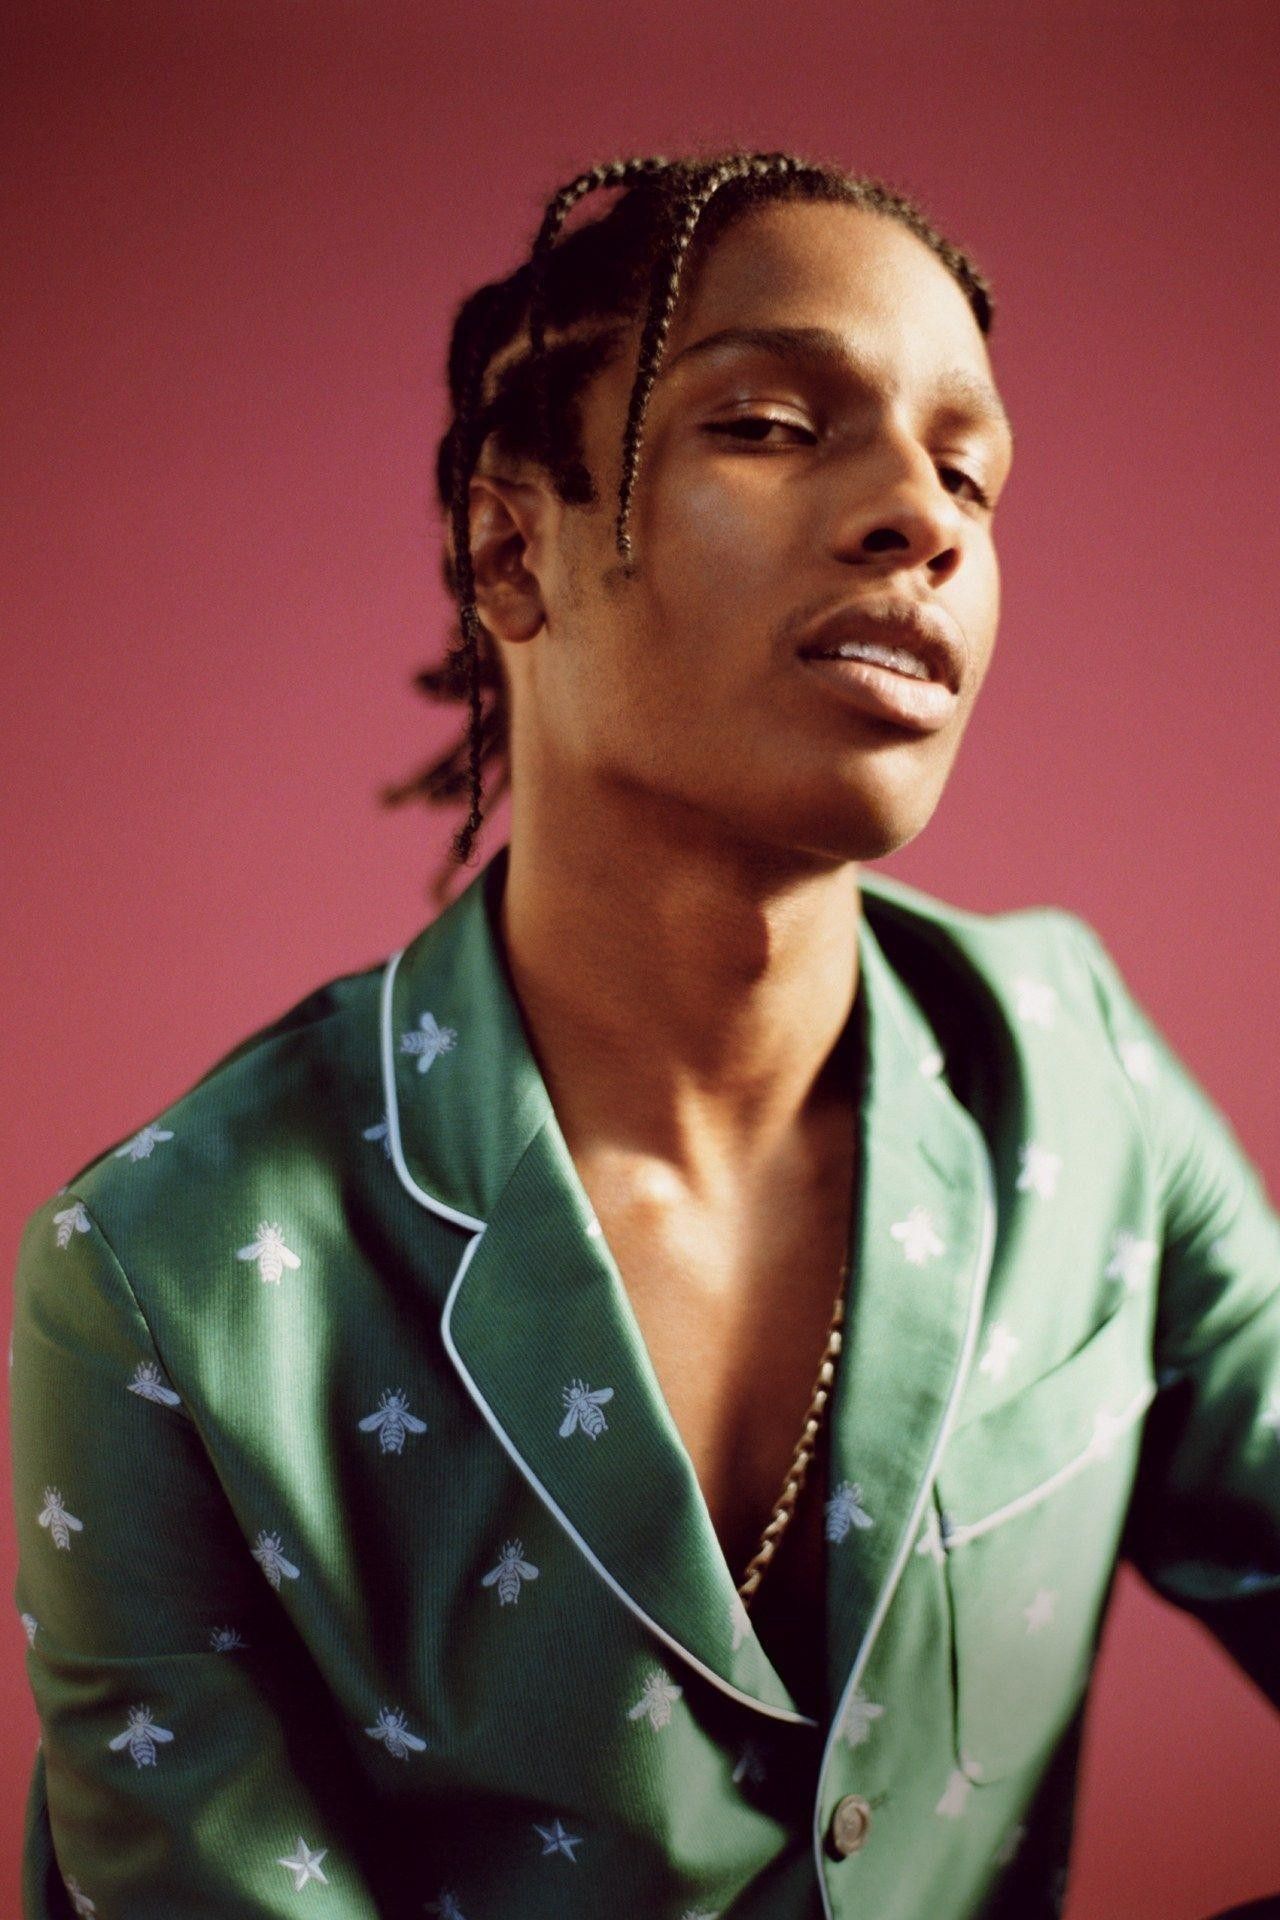 Asap Rocky Wallpaper For iPhone iPhone 7 Plus, Rocky Wallpaper iPhone